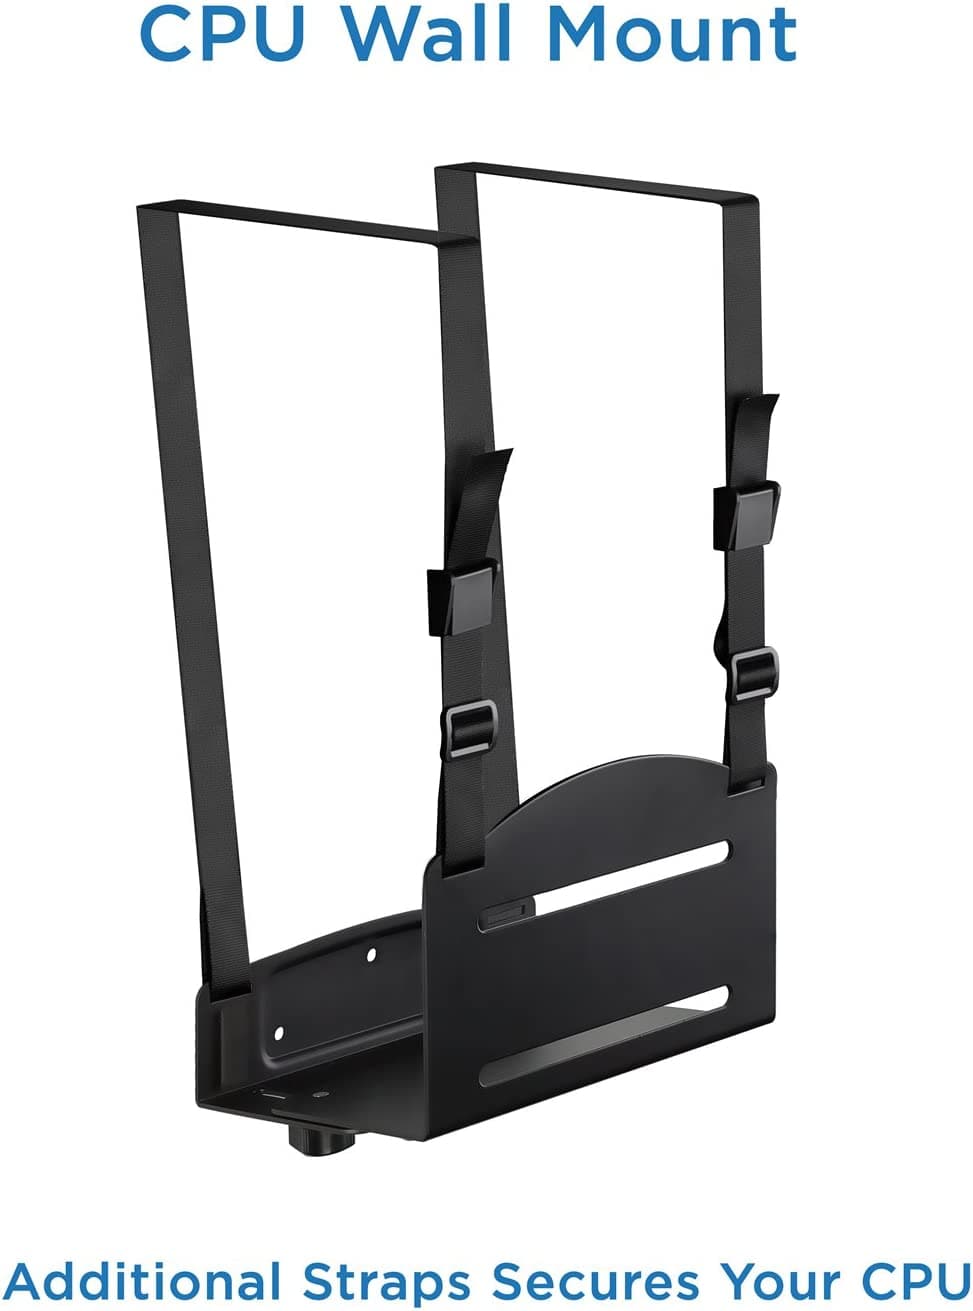 Monitor and Keyboard Wall Mount with CPU Holder